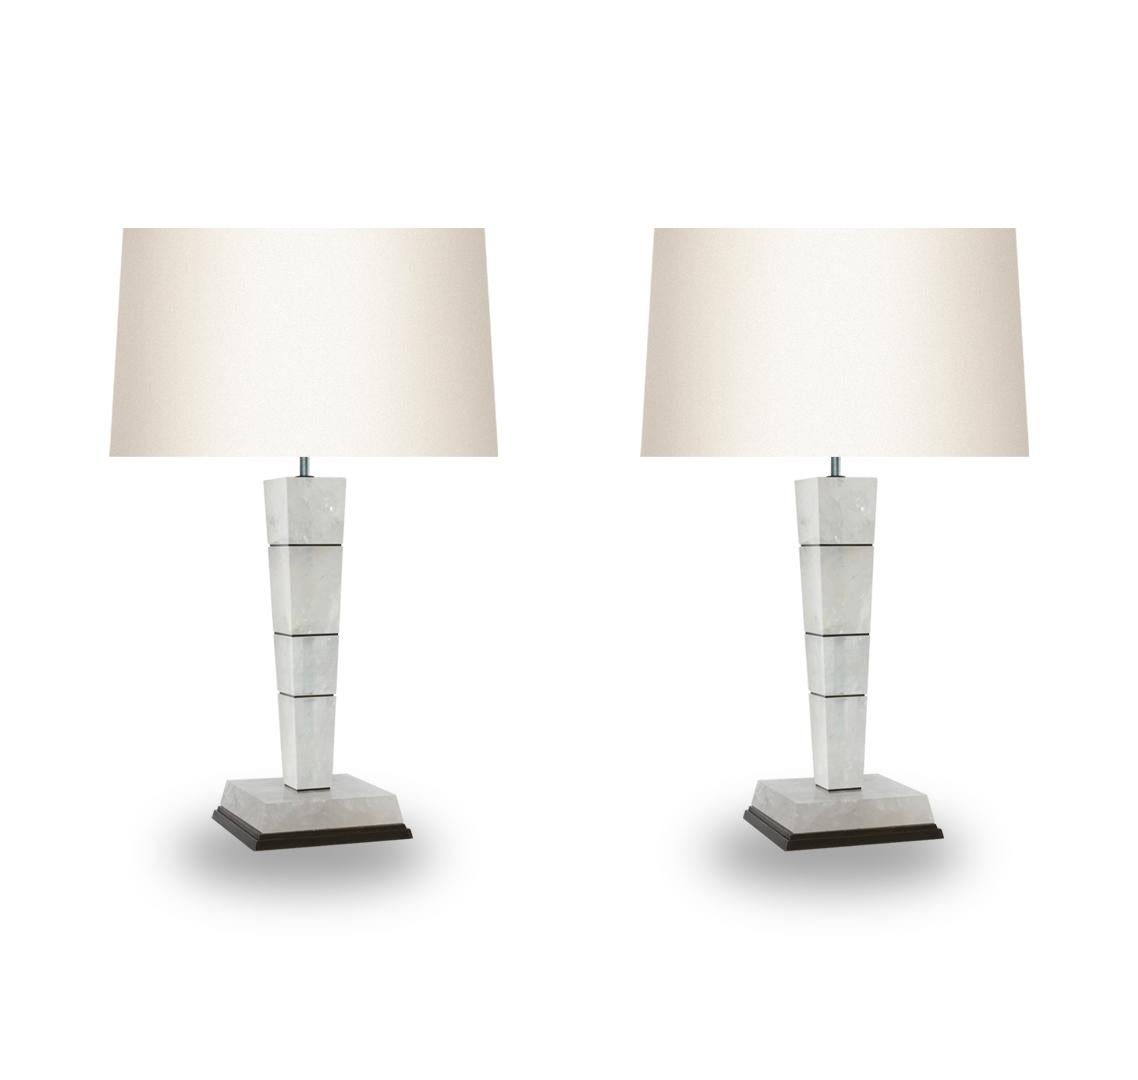 Pair of modern rock crystal lamps with aged brass finish,to the top of the rock crystal 14 inch
Lamp shades are not included.
Created by Phoenix 